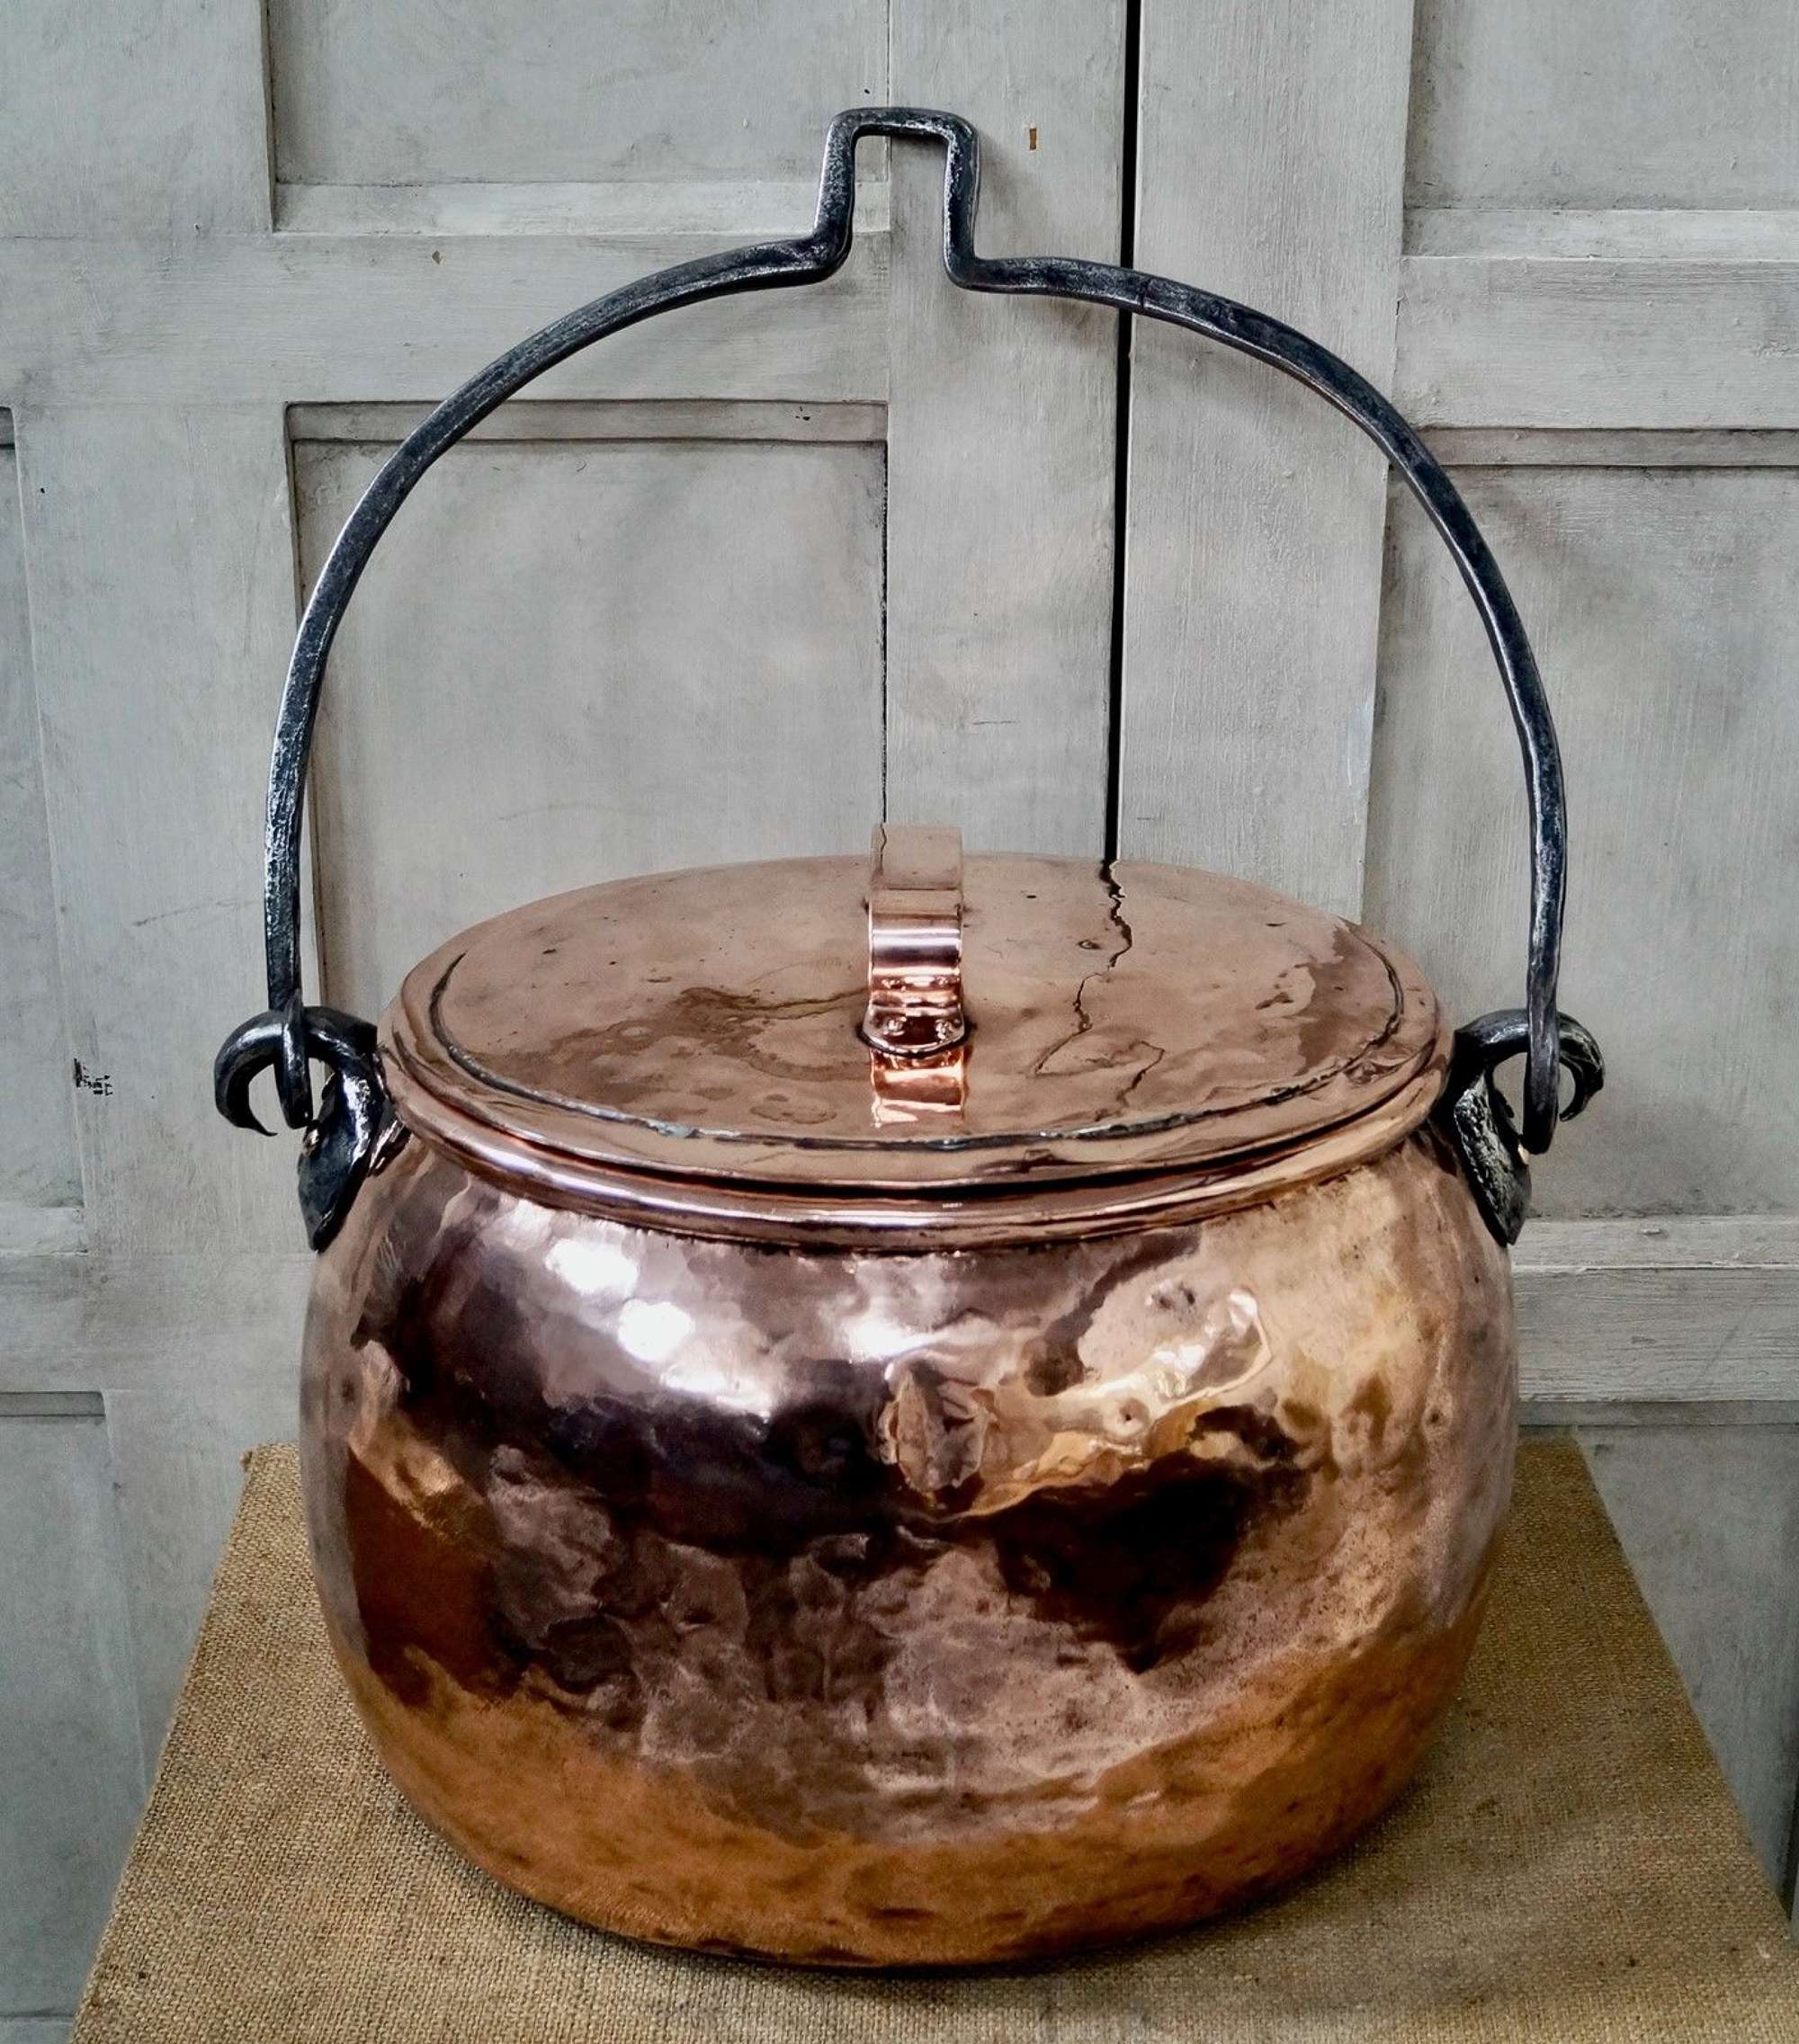 Victorian Polished Copper & Iron Cooking Pot